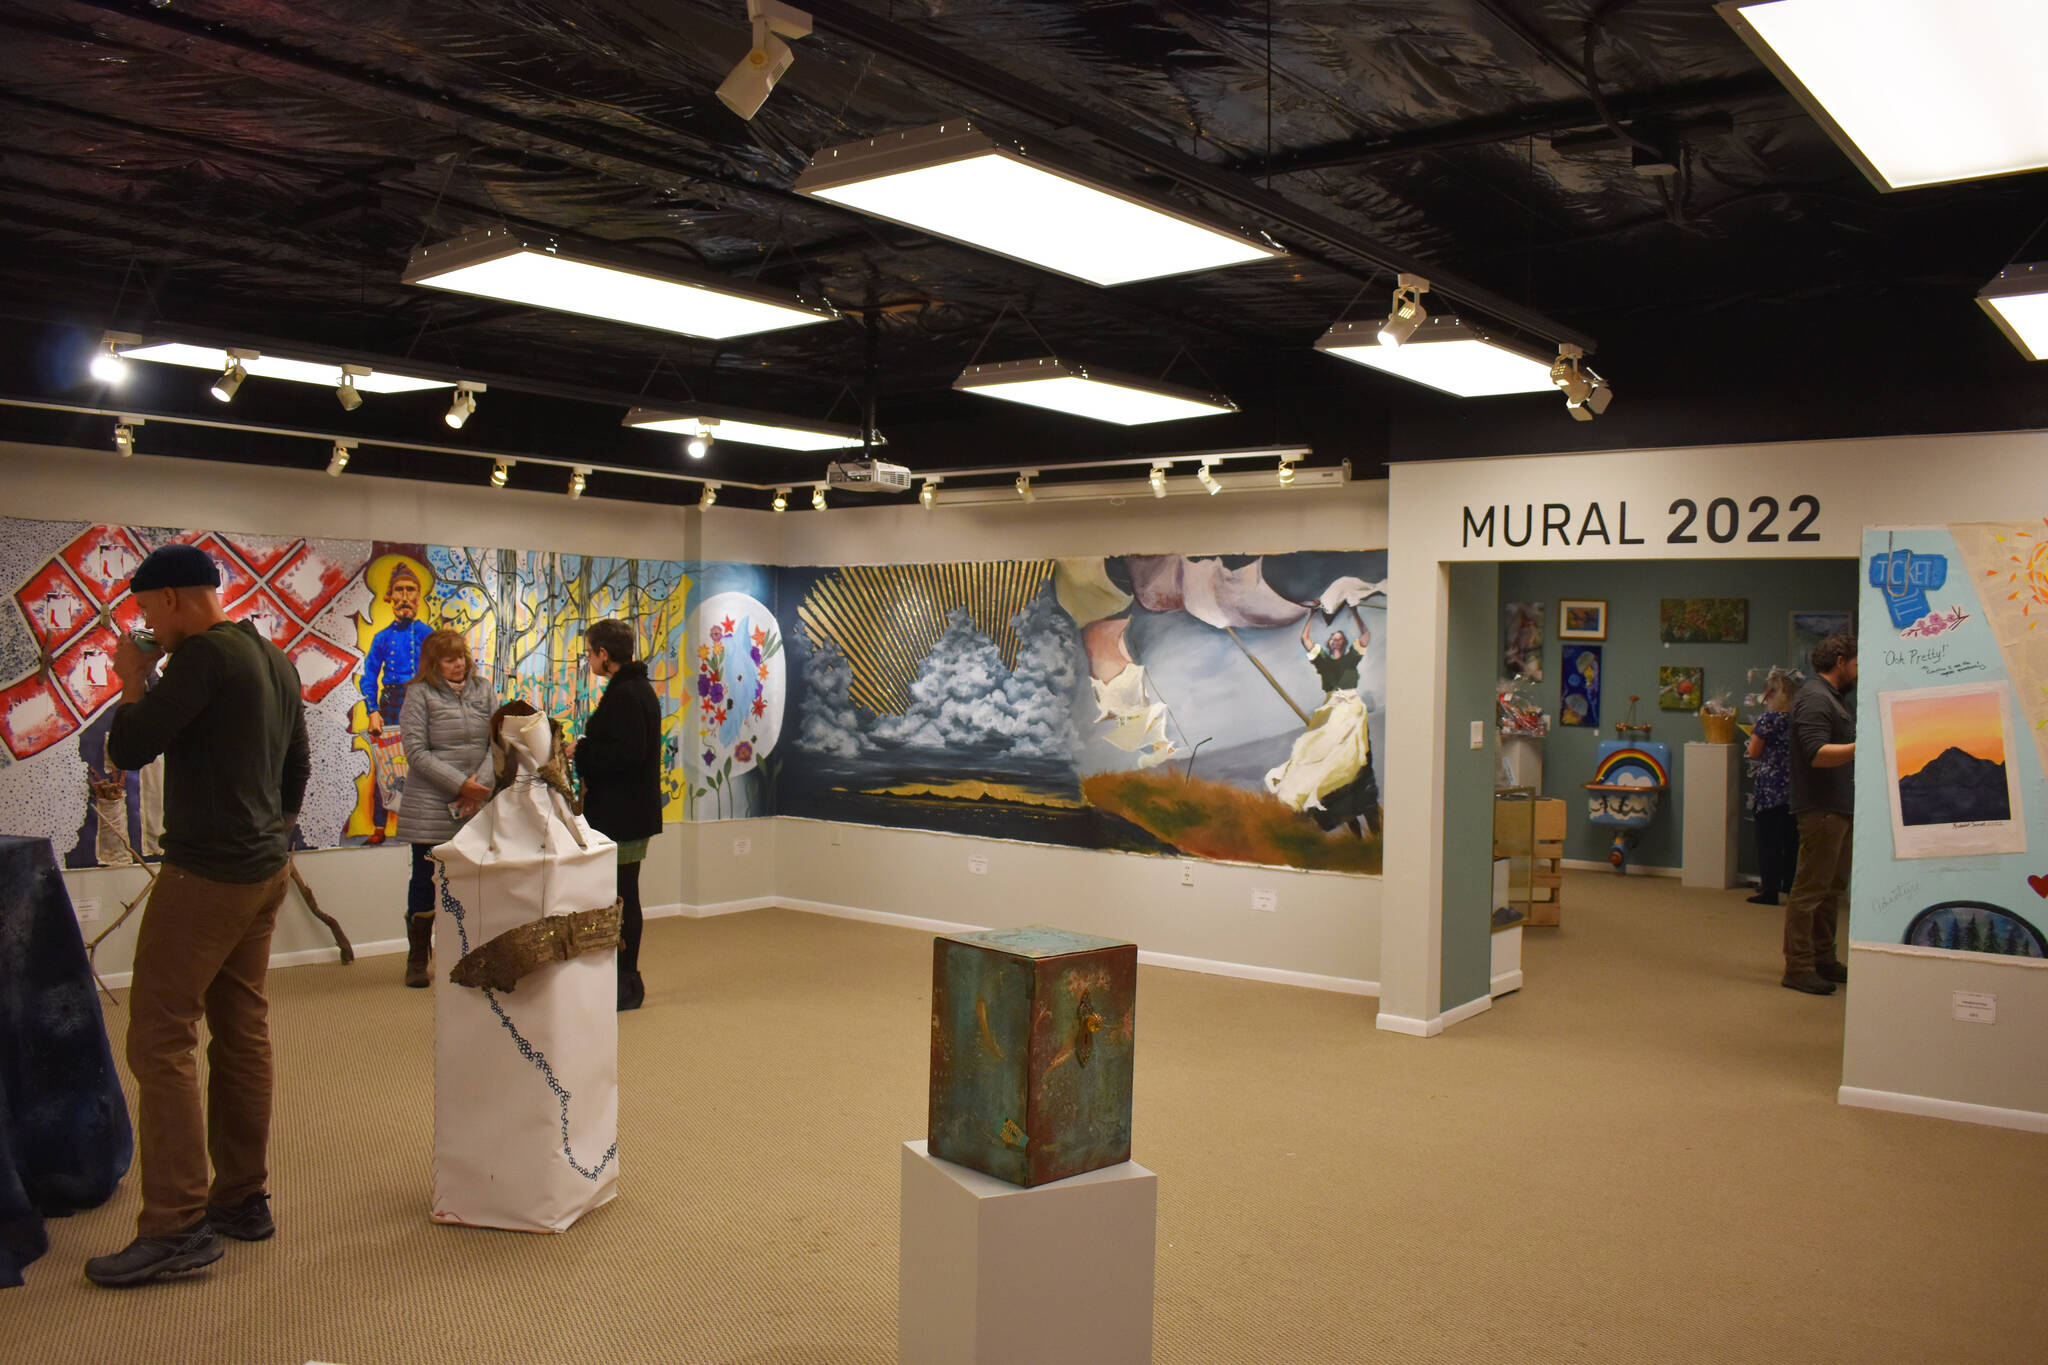 Attendees of the opening reception for the Mural 2022 Exhibition view this year’s mural at the Kenai Art Center in Kenai, Alaska, on Thursday, Nov. 10, 2022. (Jake Dye/Peninsula Clarion)